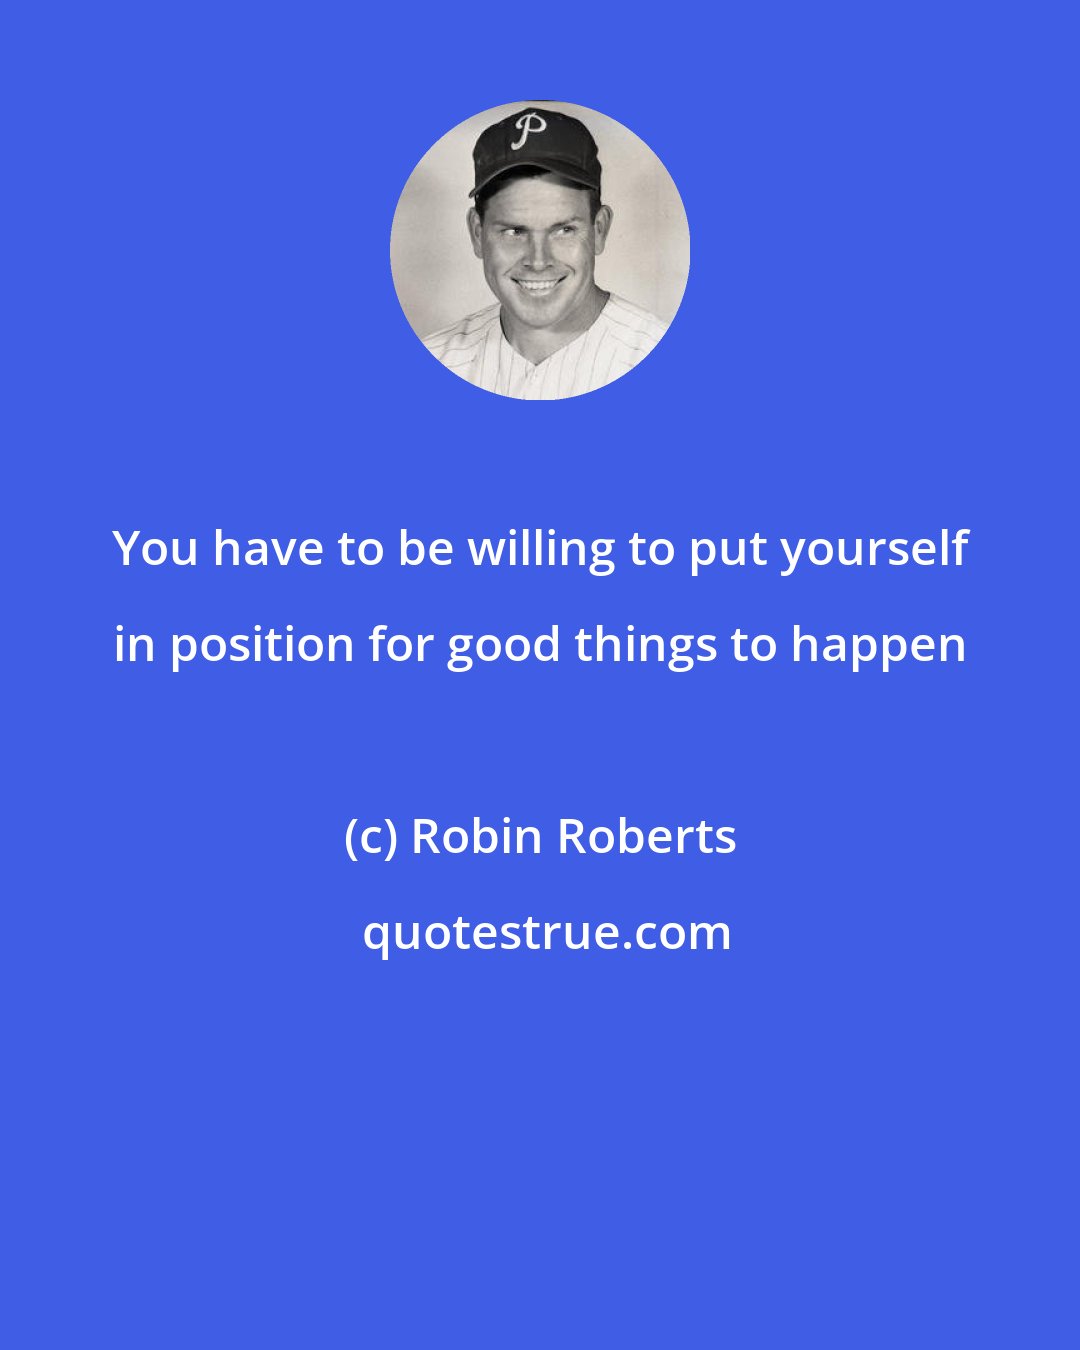 Robin Roberts: You have to be willing to put yourself in position for good things to happen